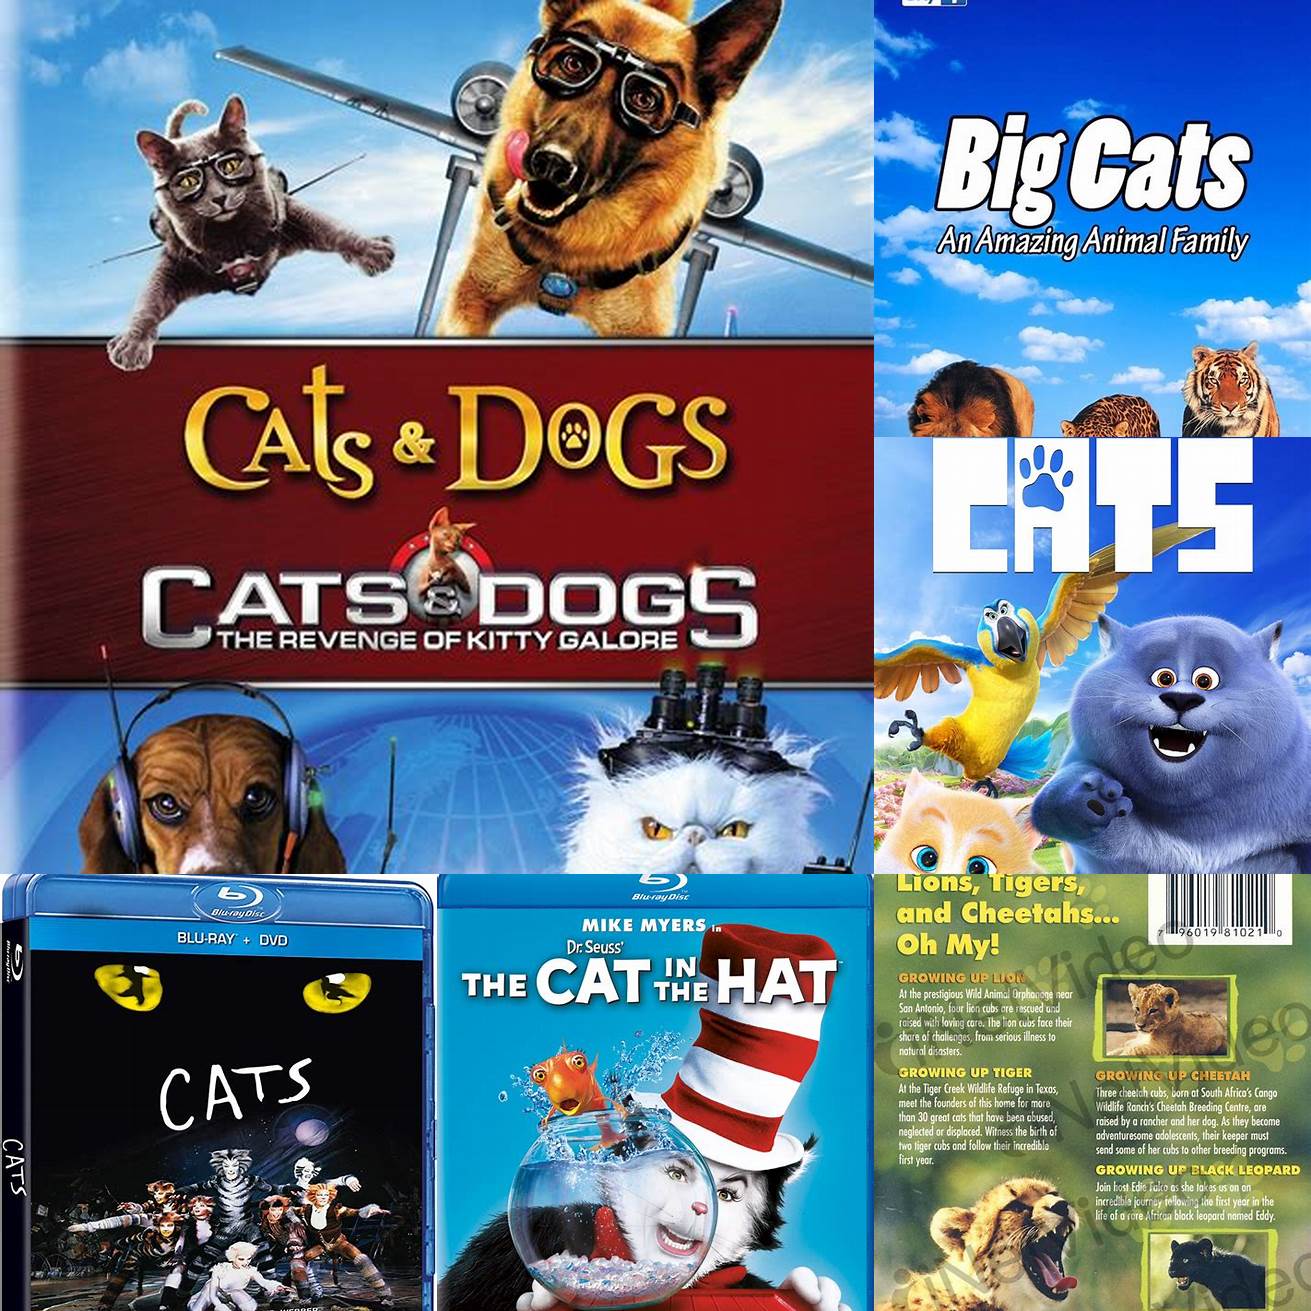 Images of animals featured in the DVD